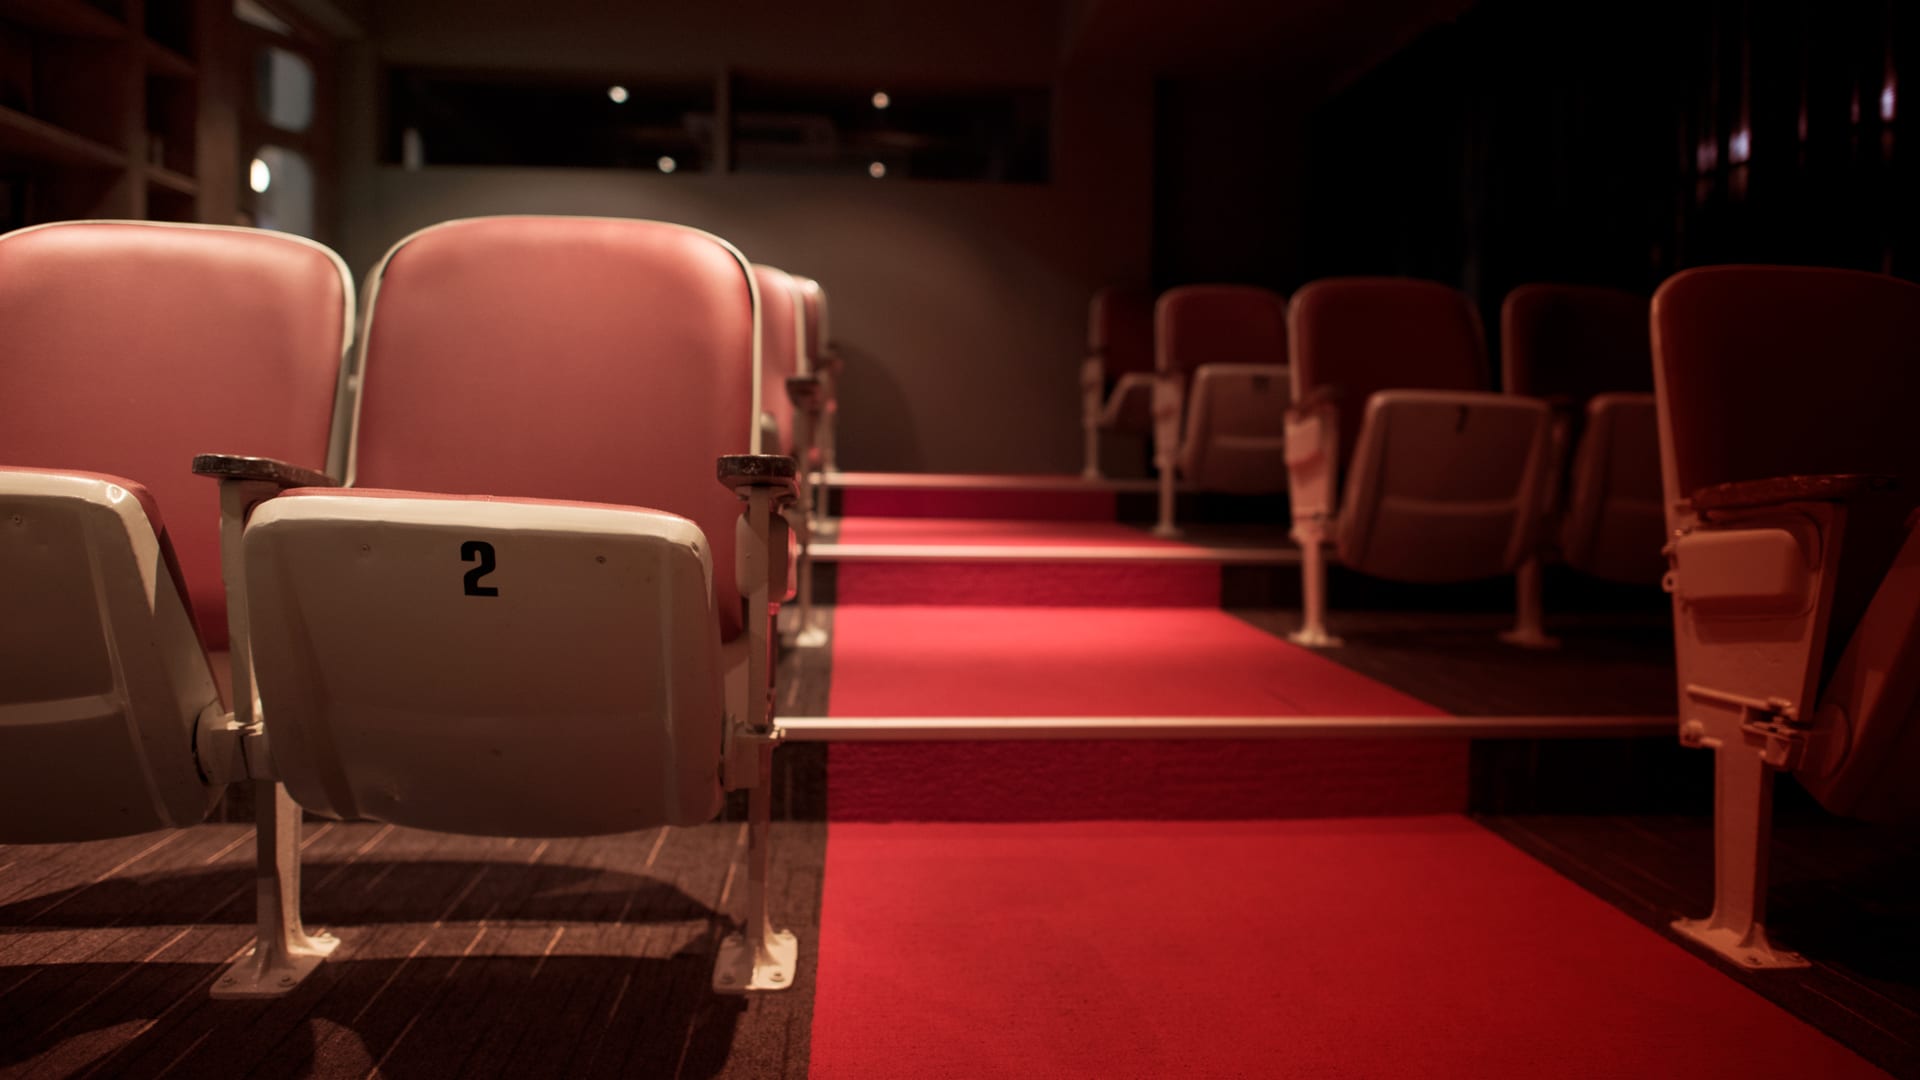 Study: Male film critics outnumber women two to one